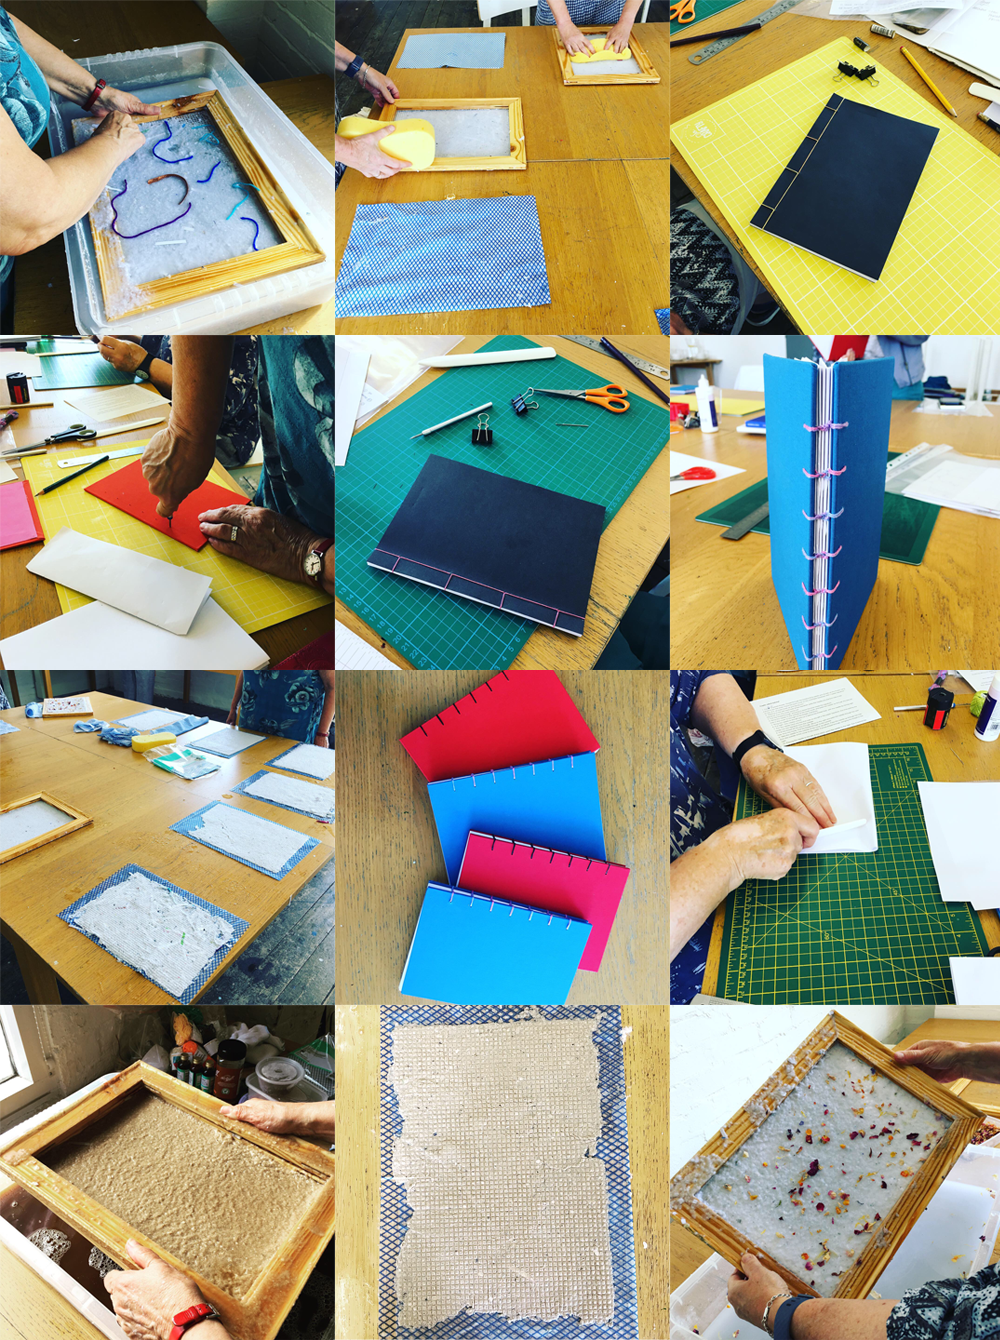 Bookbinding workshop at The Steel Rooms, Brigg